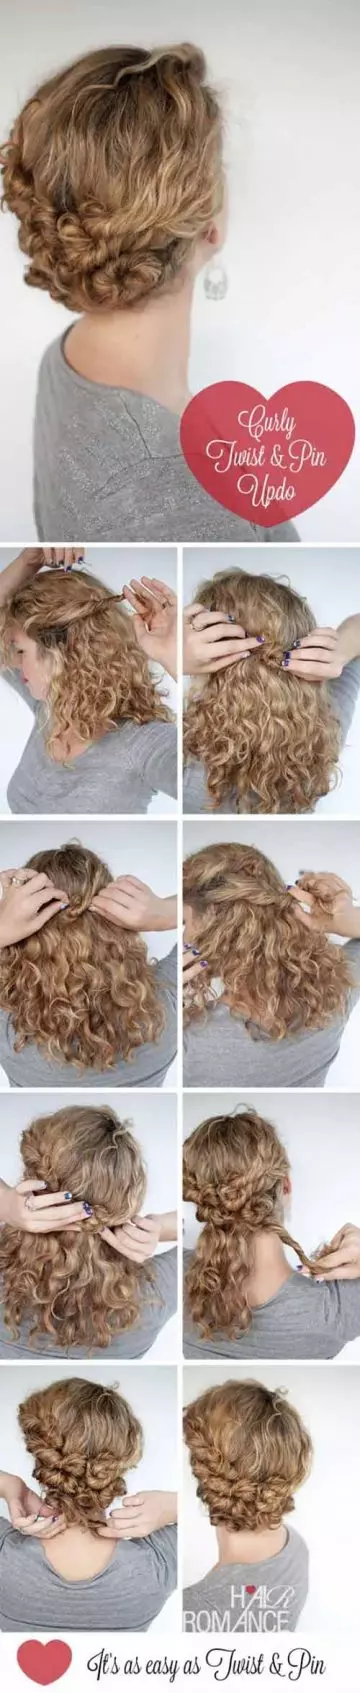 Twist and pin updo for curly hair